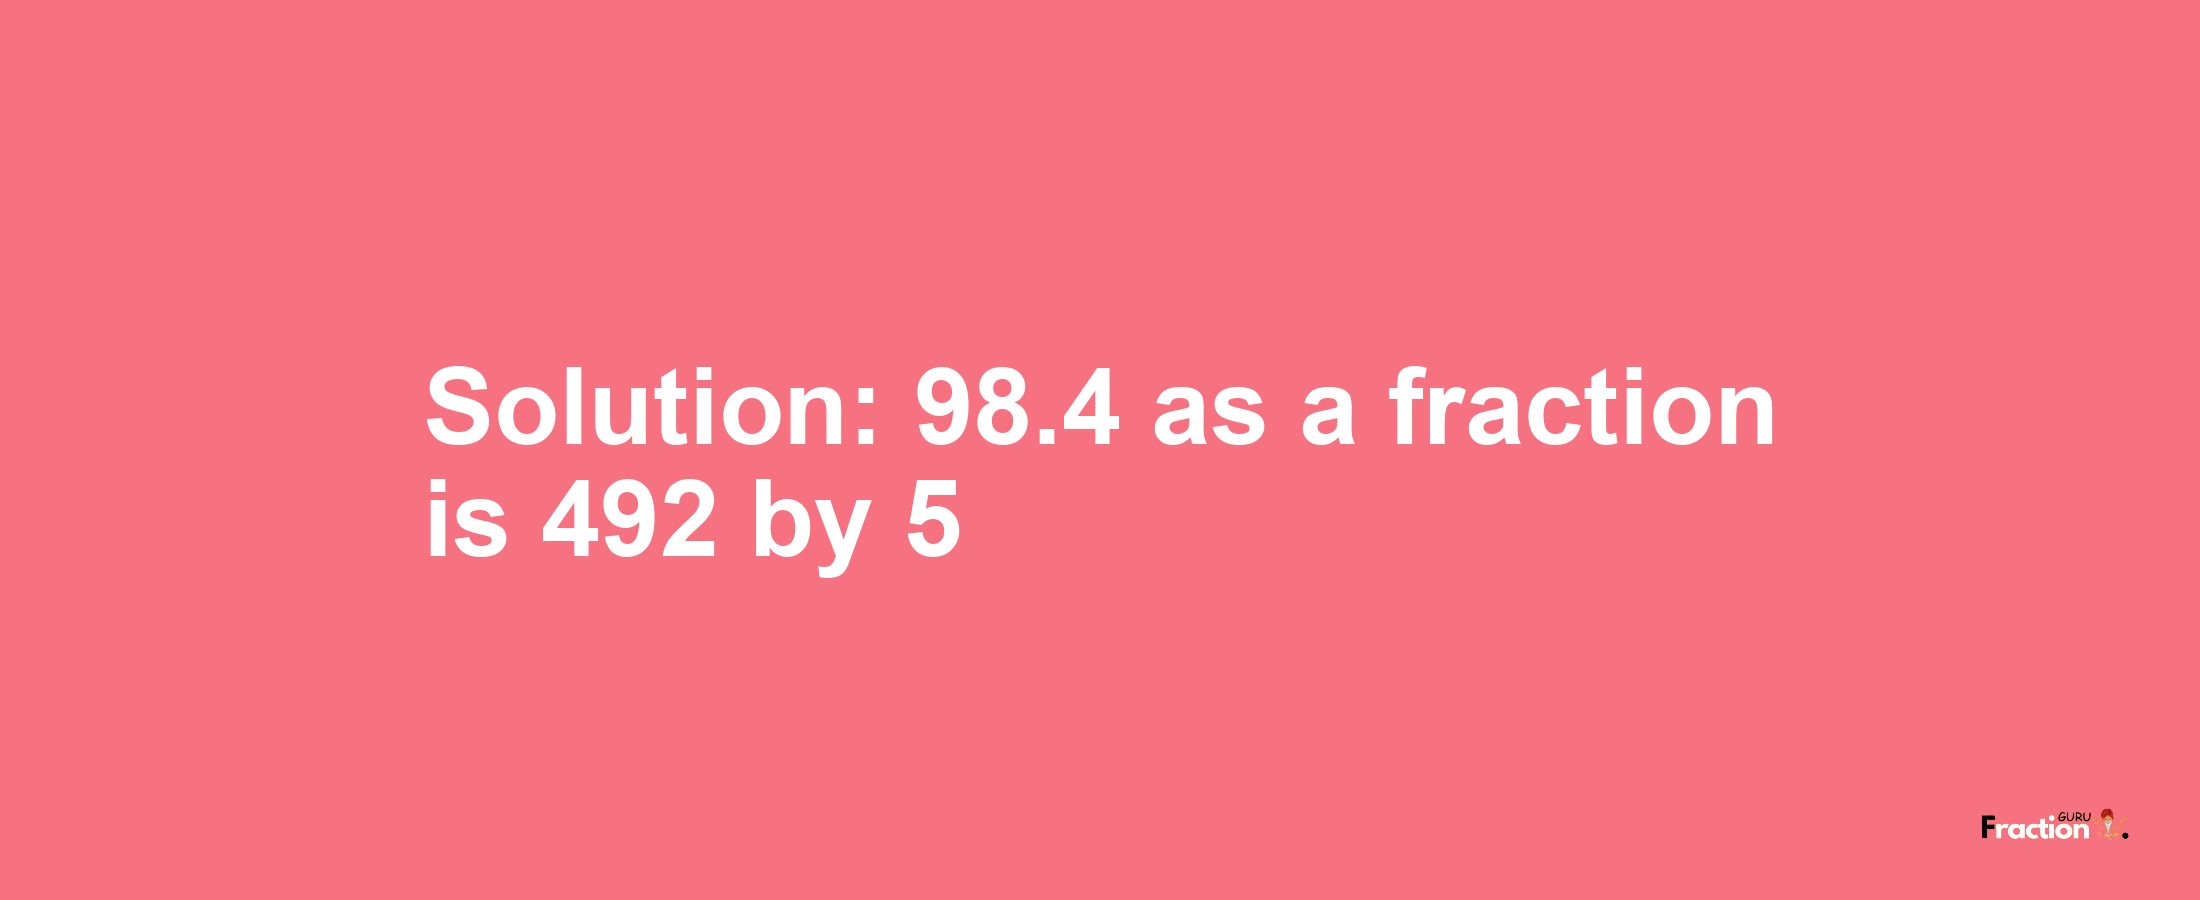 Solution:98.4 as a fraction is 492/5